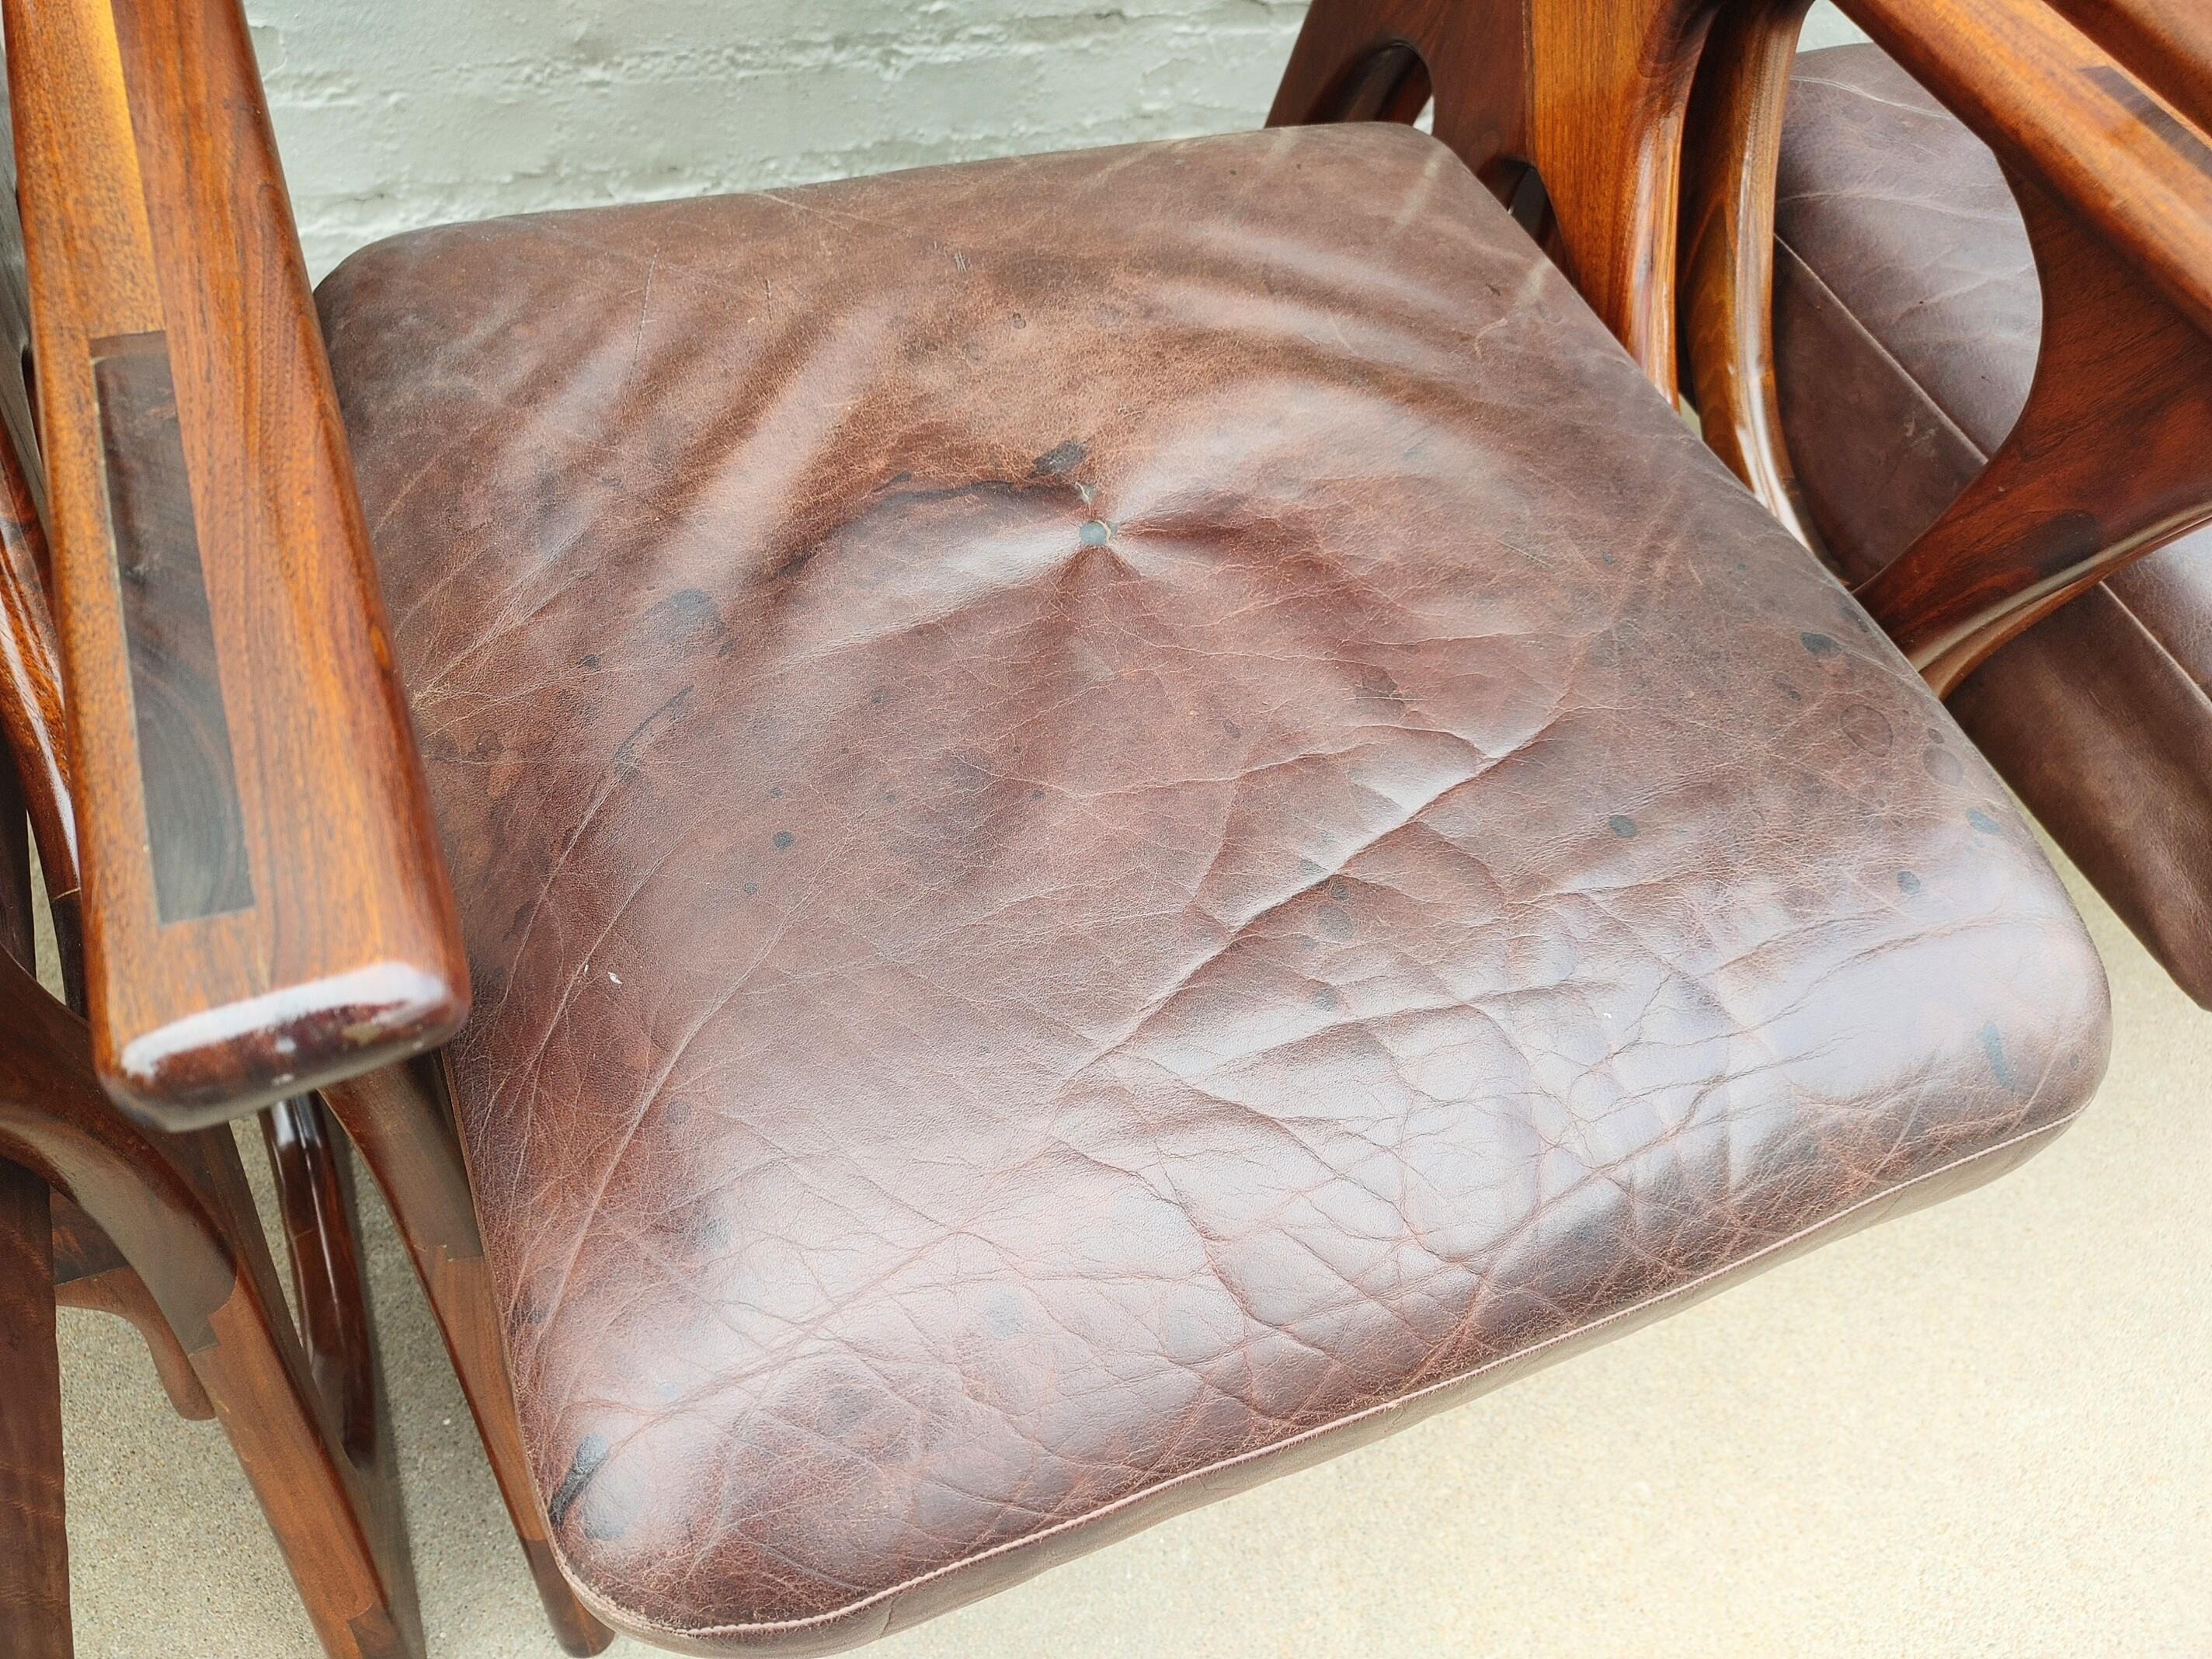 American Studio Craft Wendell Castle Inspired Chairs In Good Condition For Sale In Tulsa, OK